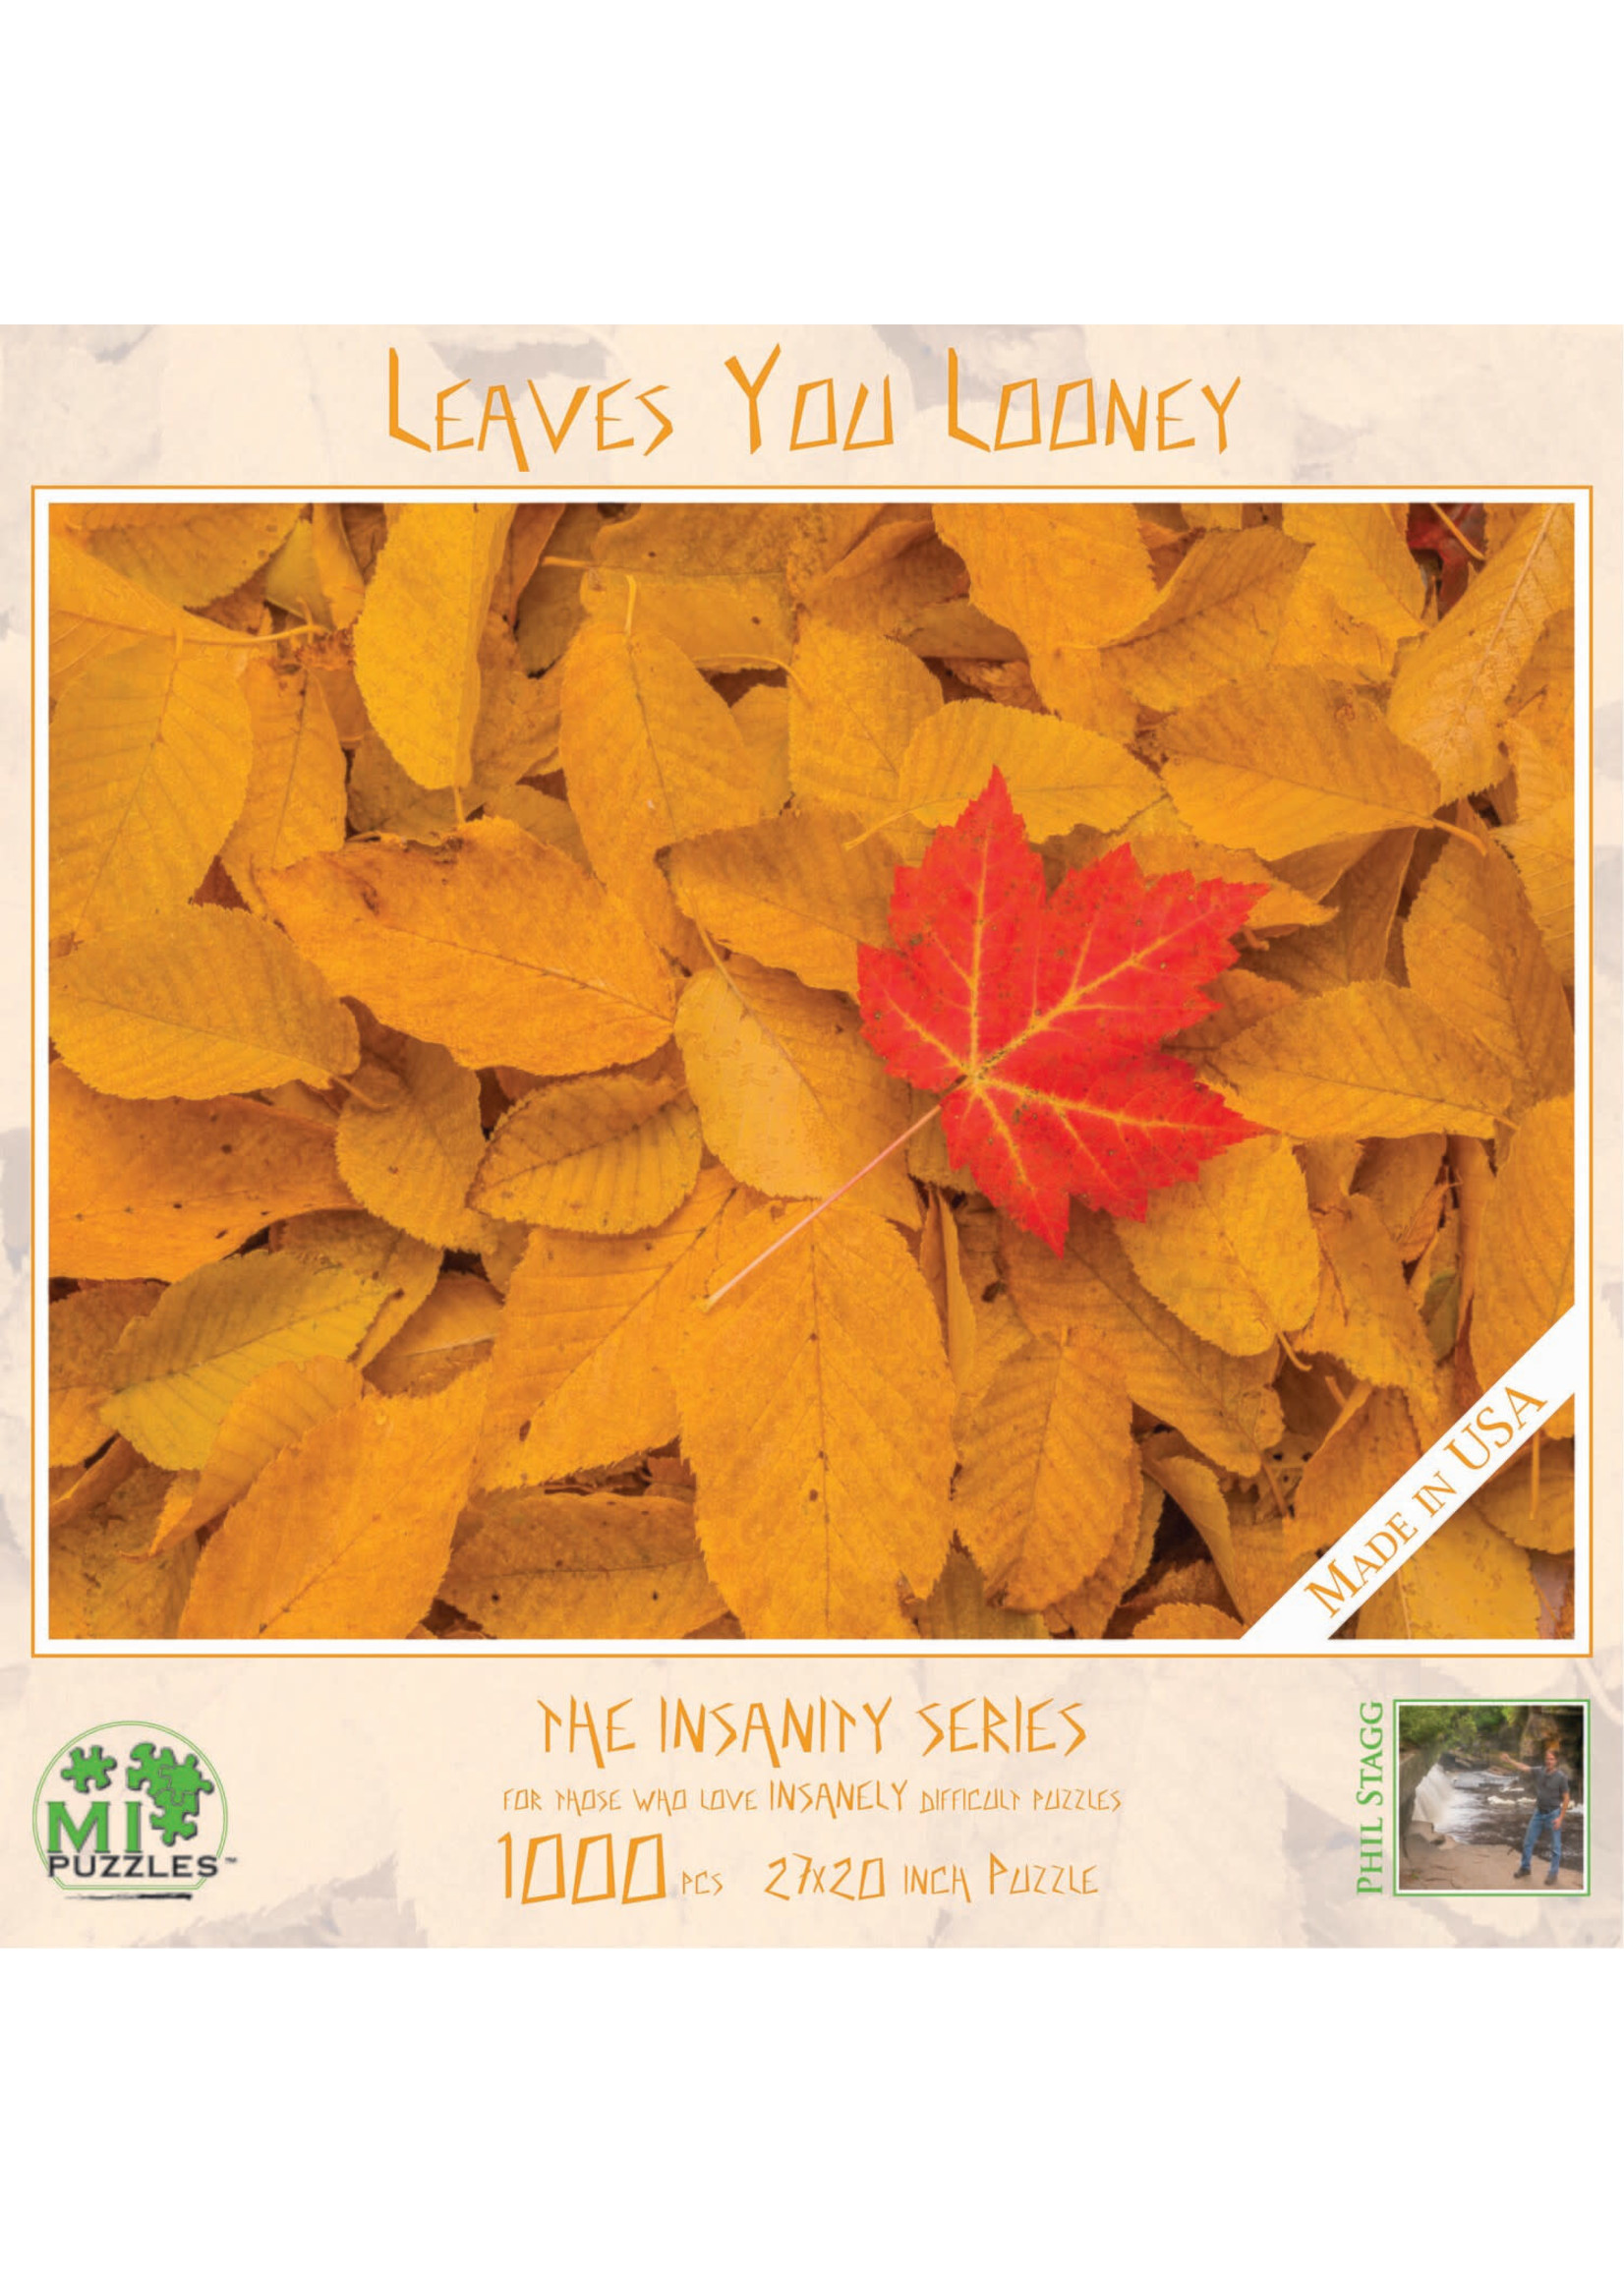 MI Puzzles Leaves You Looney Puzzle 1000